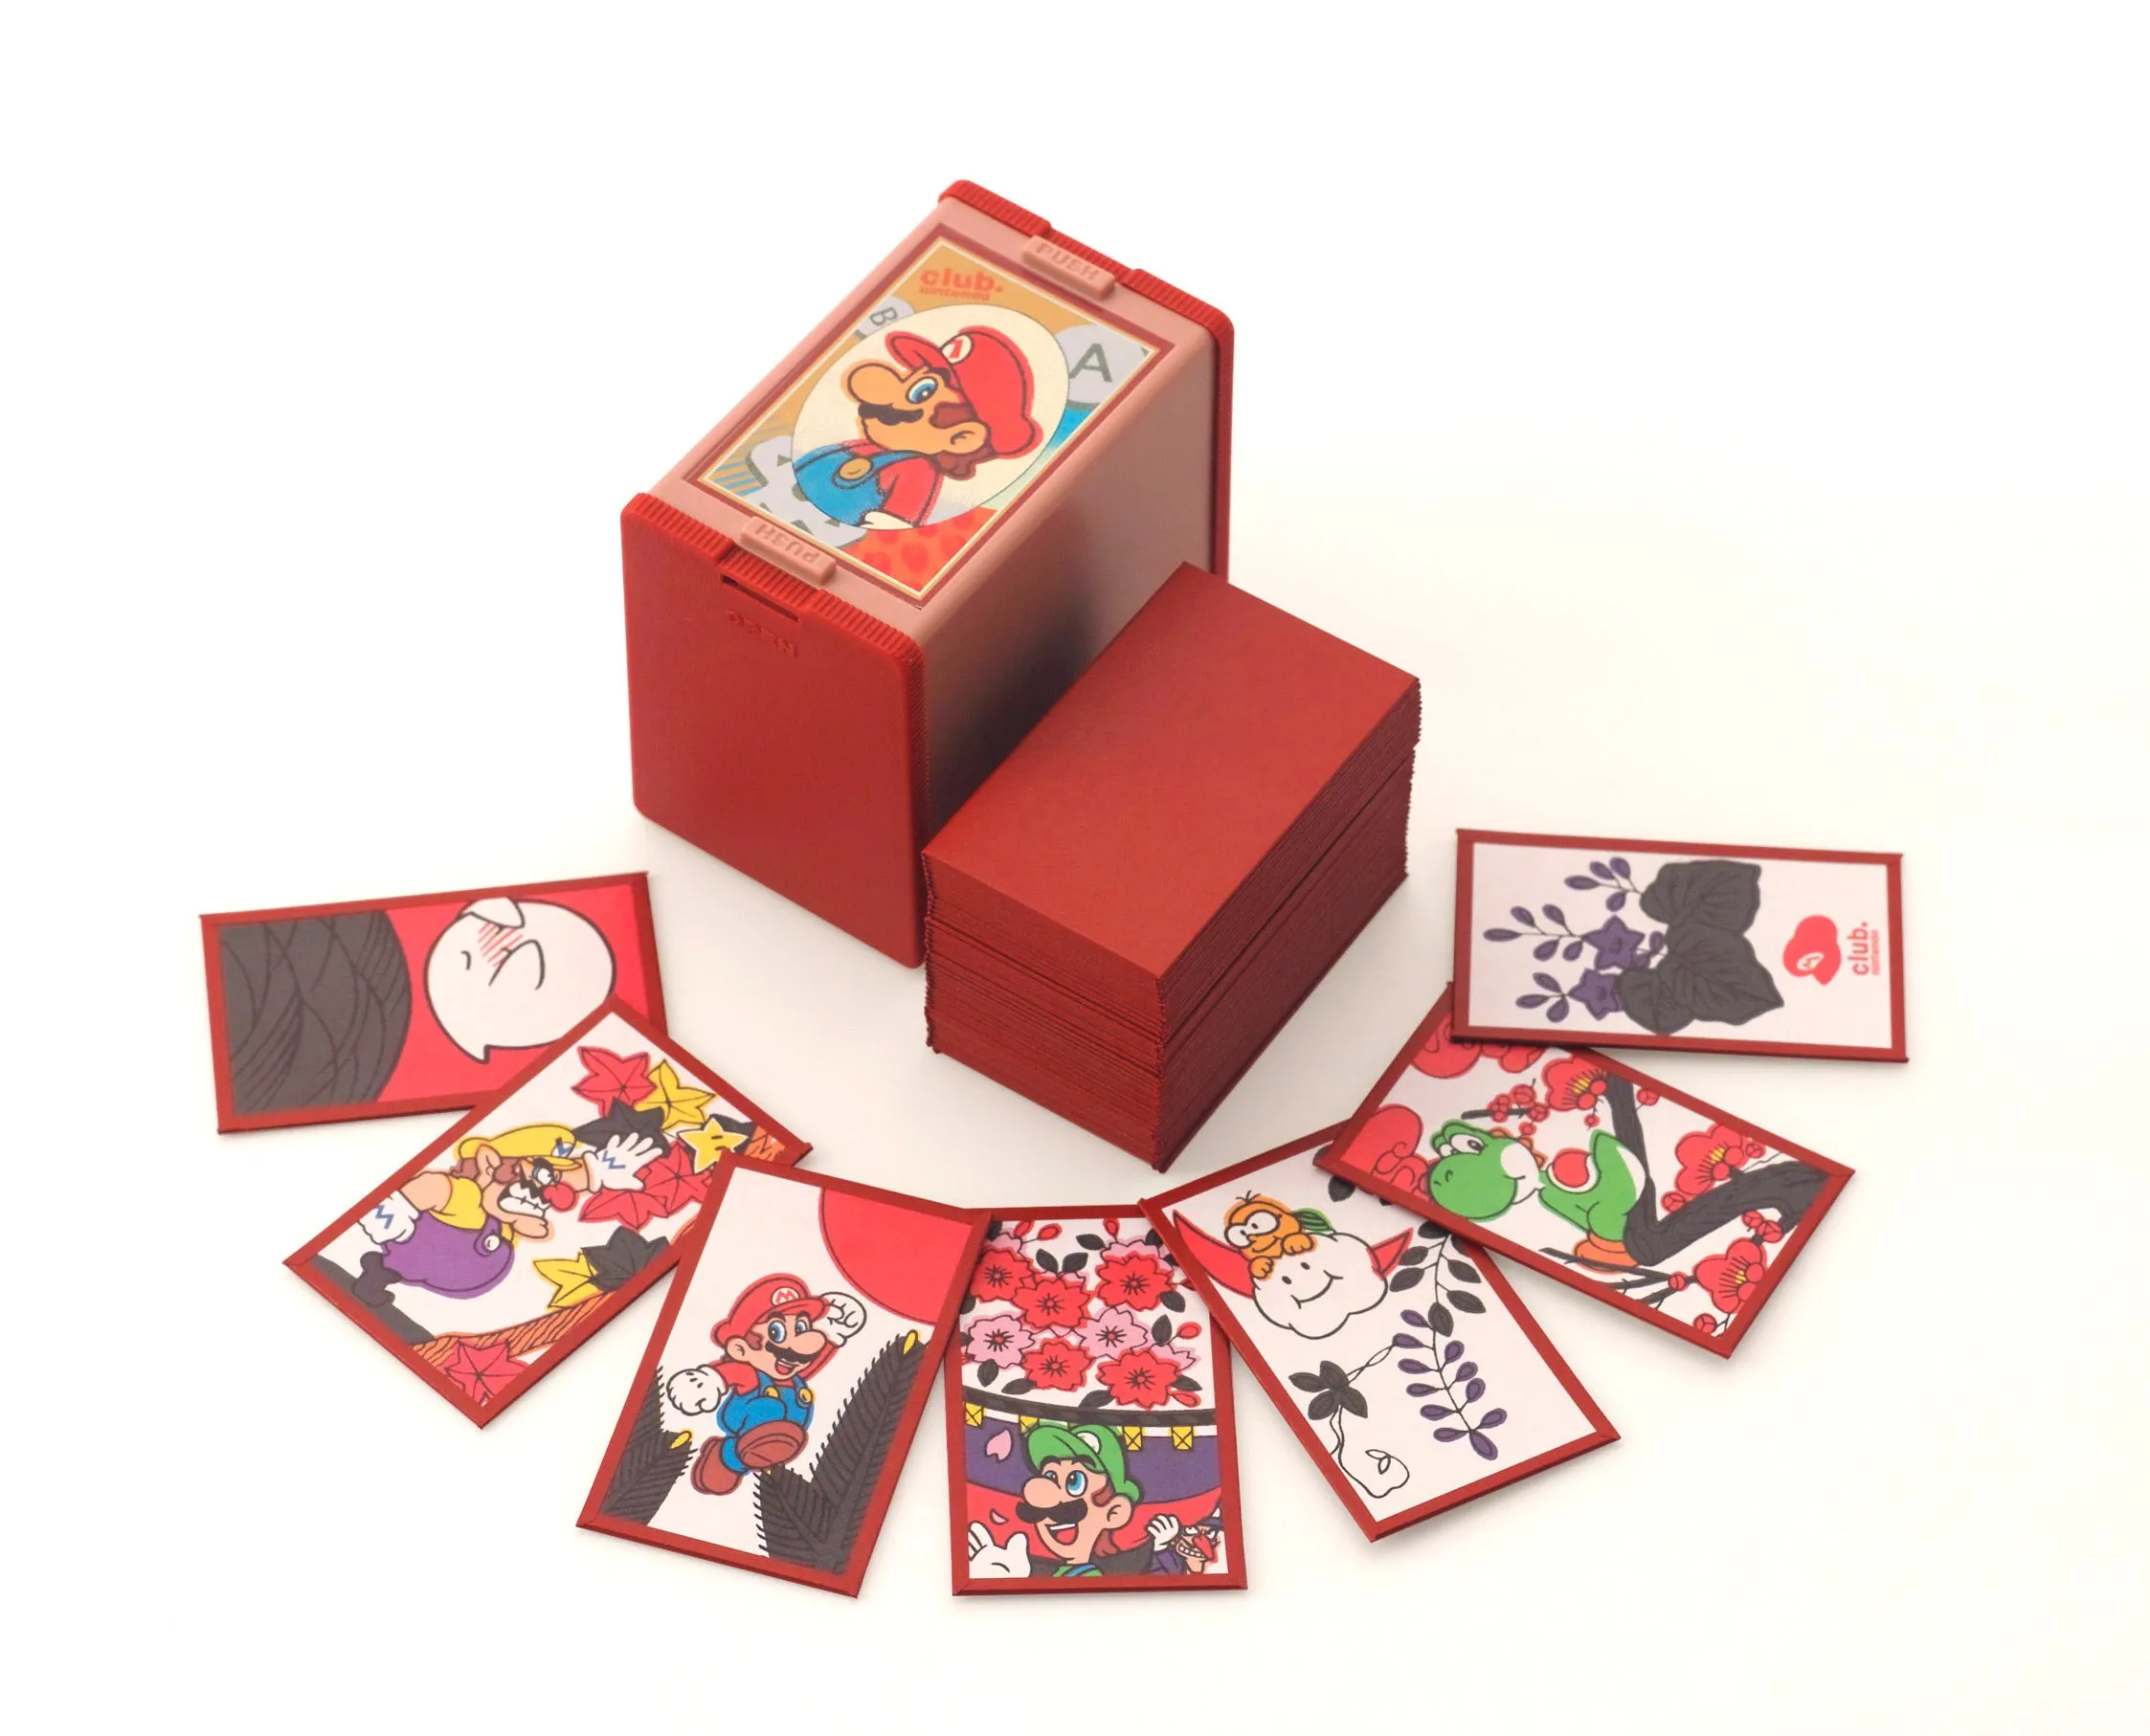 Short the history of Hanafuda cards and alleged ties – Destructoid